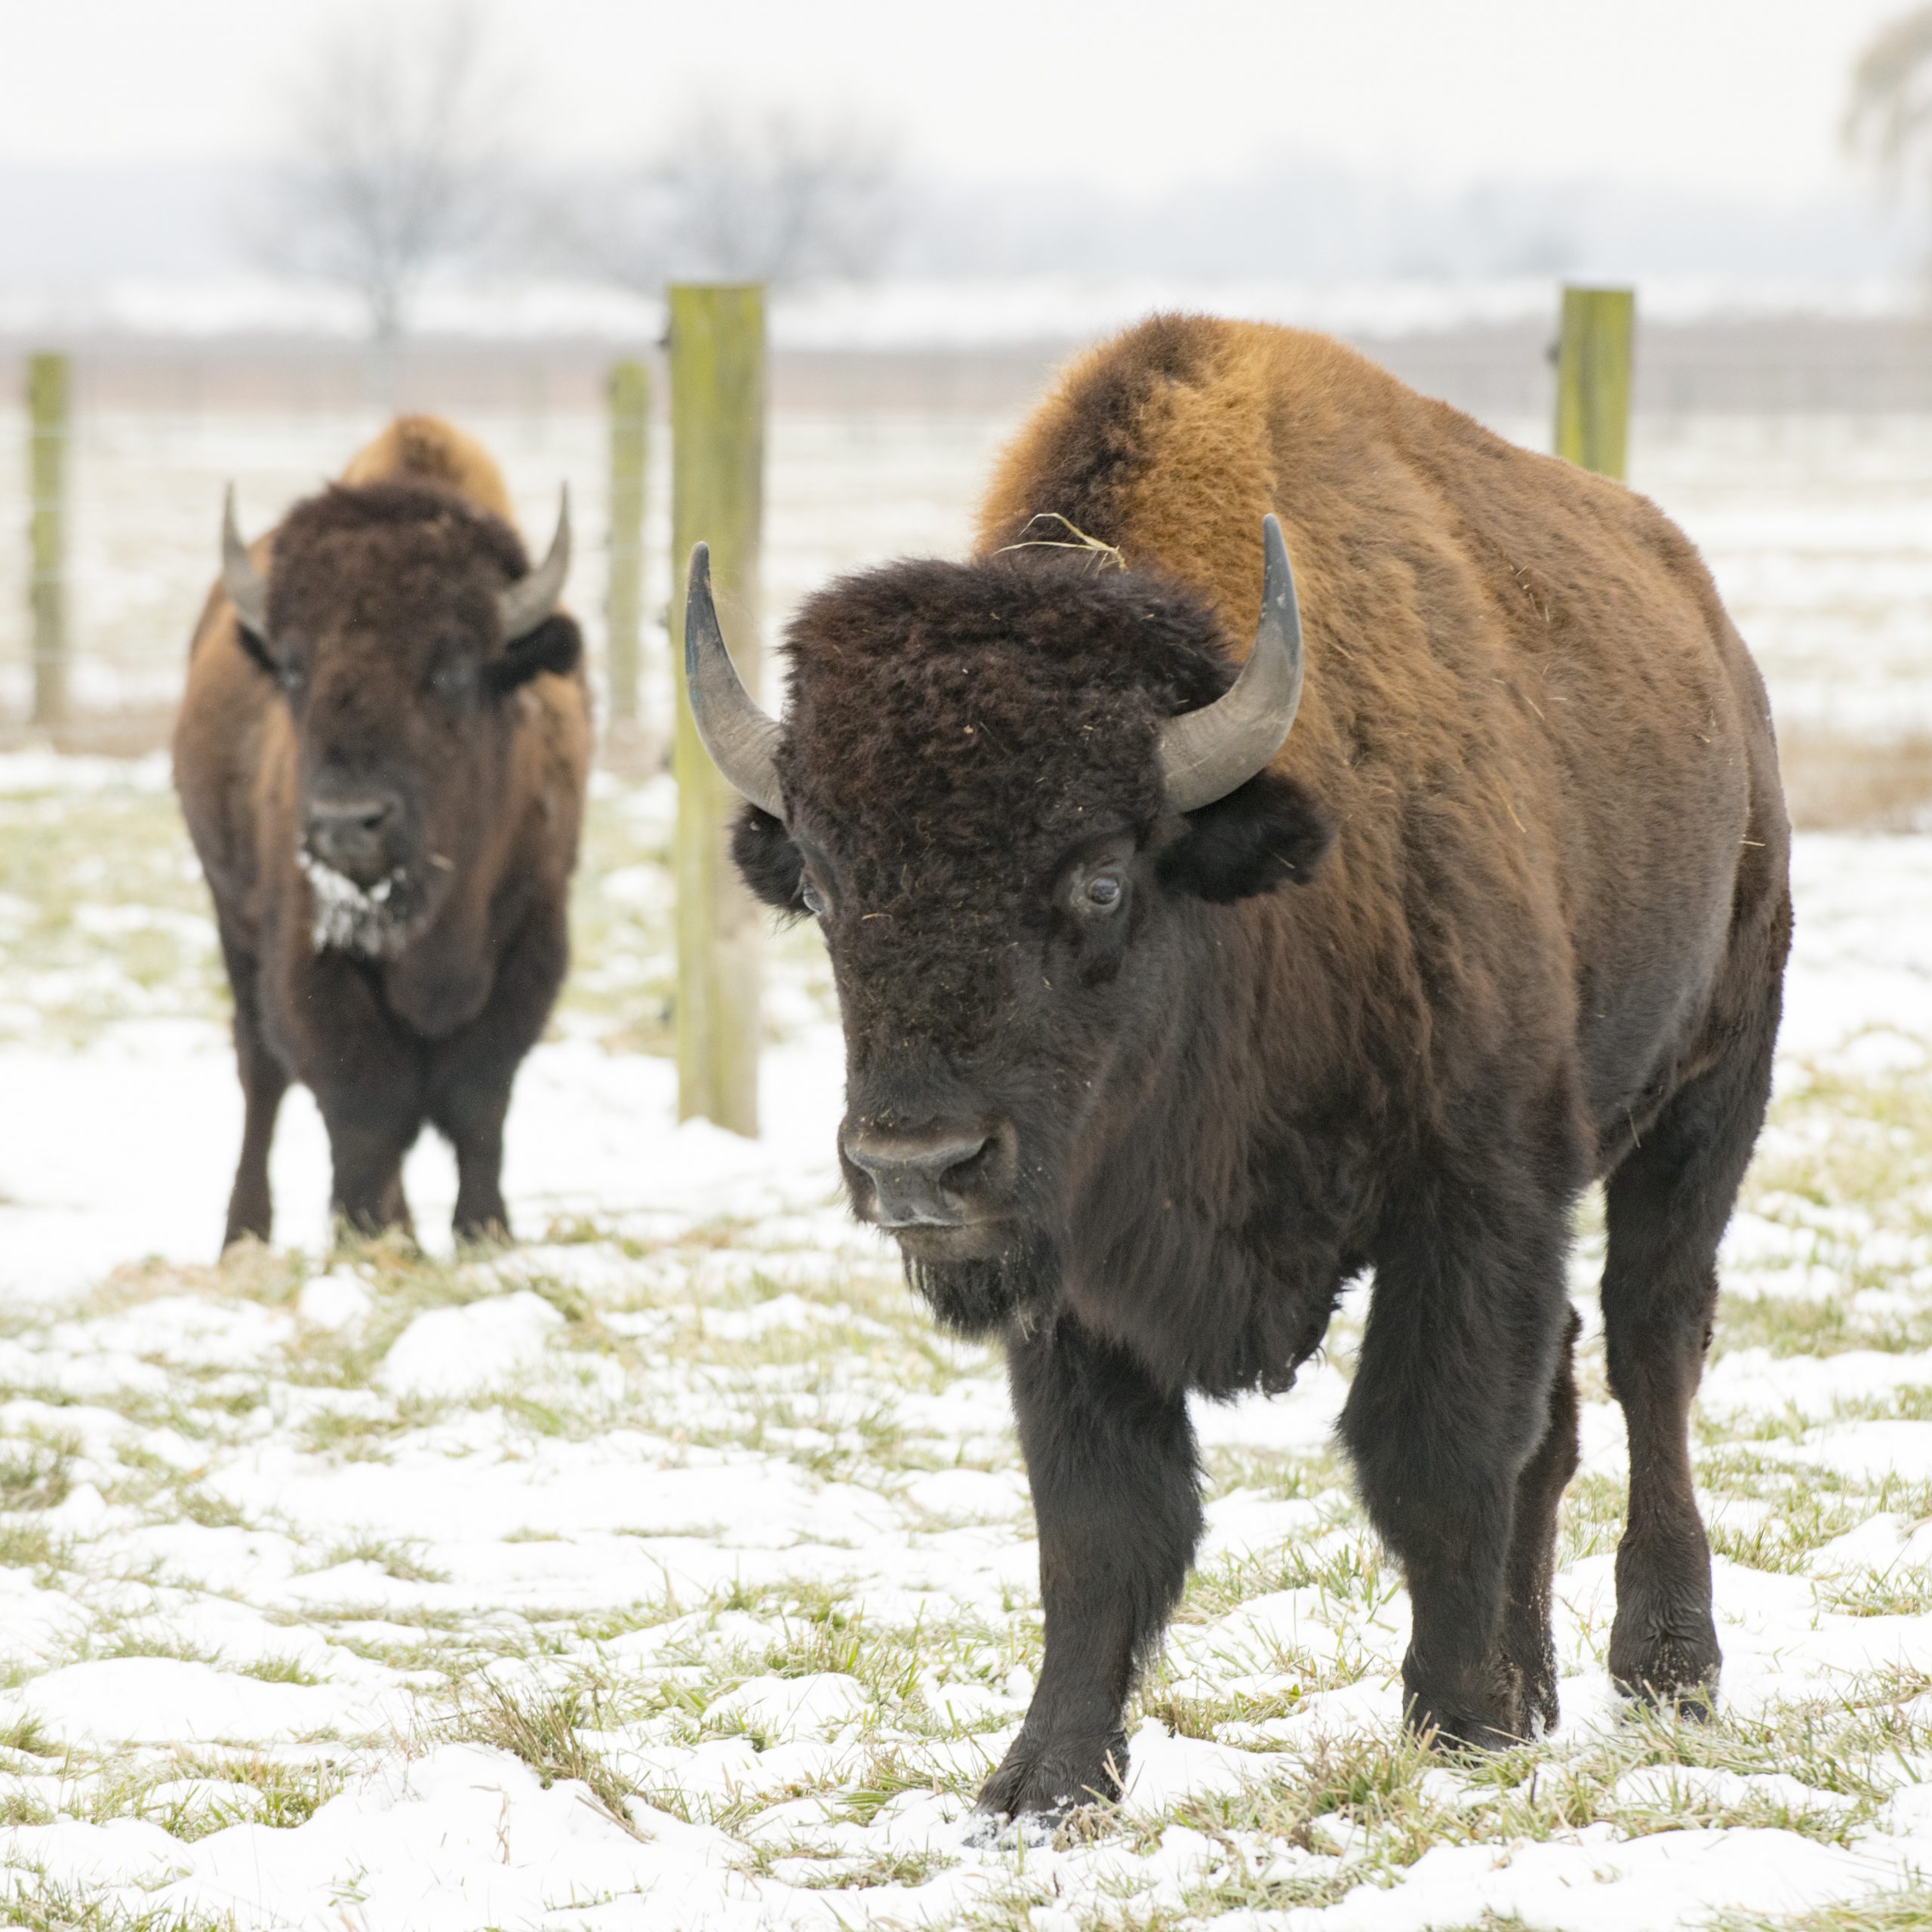 Two bison